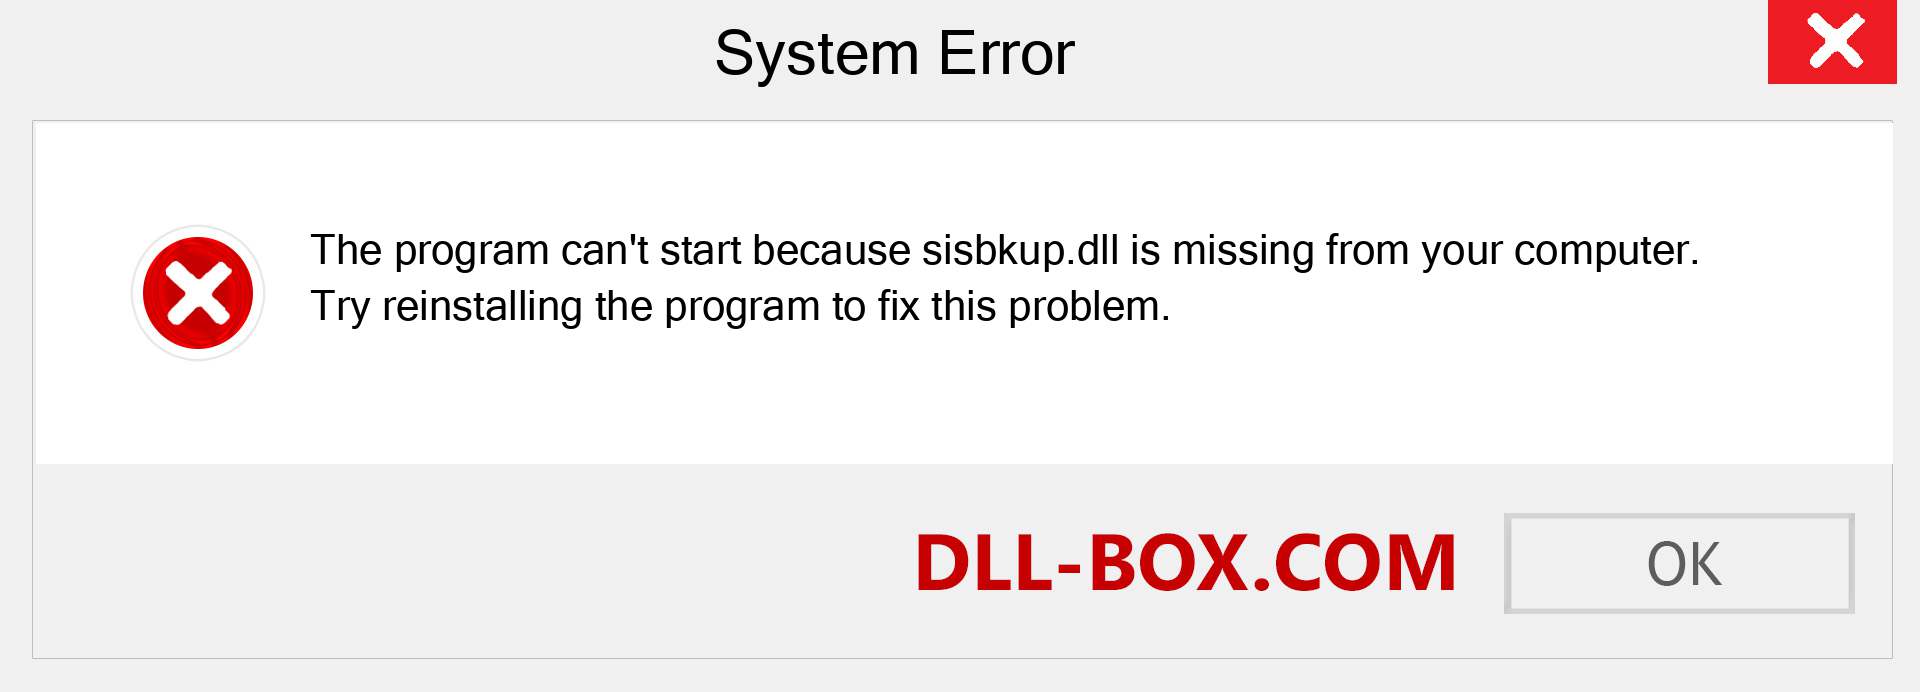  sisbkup.dll file is missing?. Download for Windows 7, 8, 10 - Fix  sisbkup dll Missing Error on Windows, photos, images